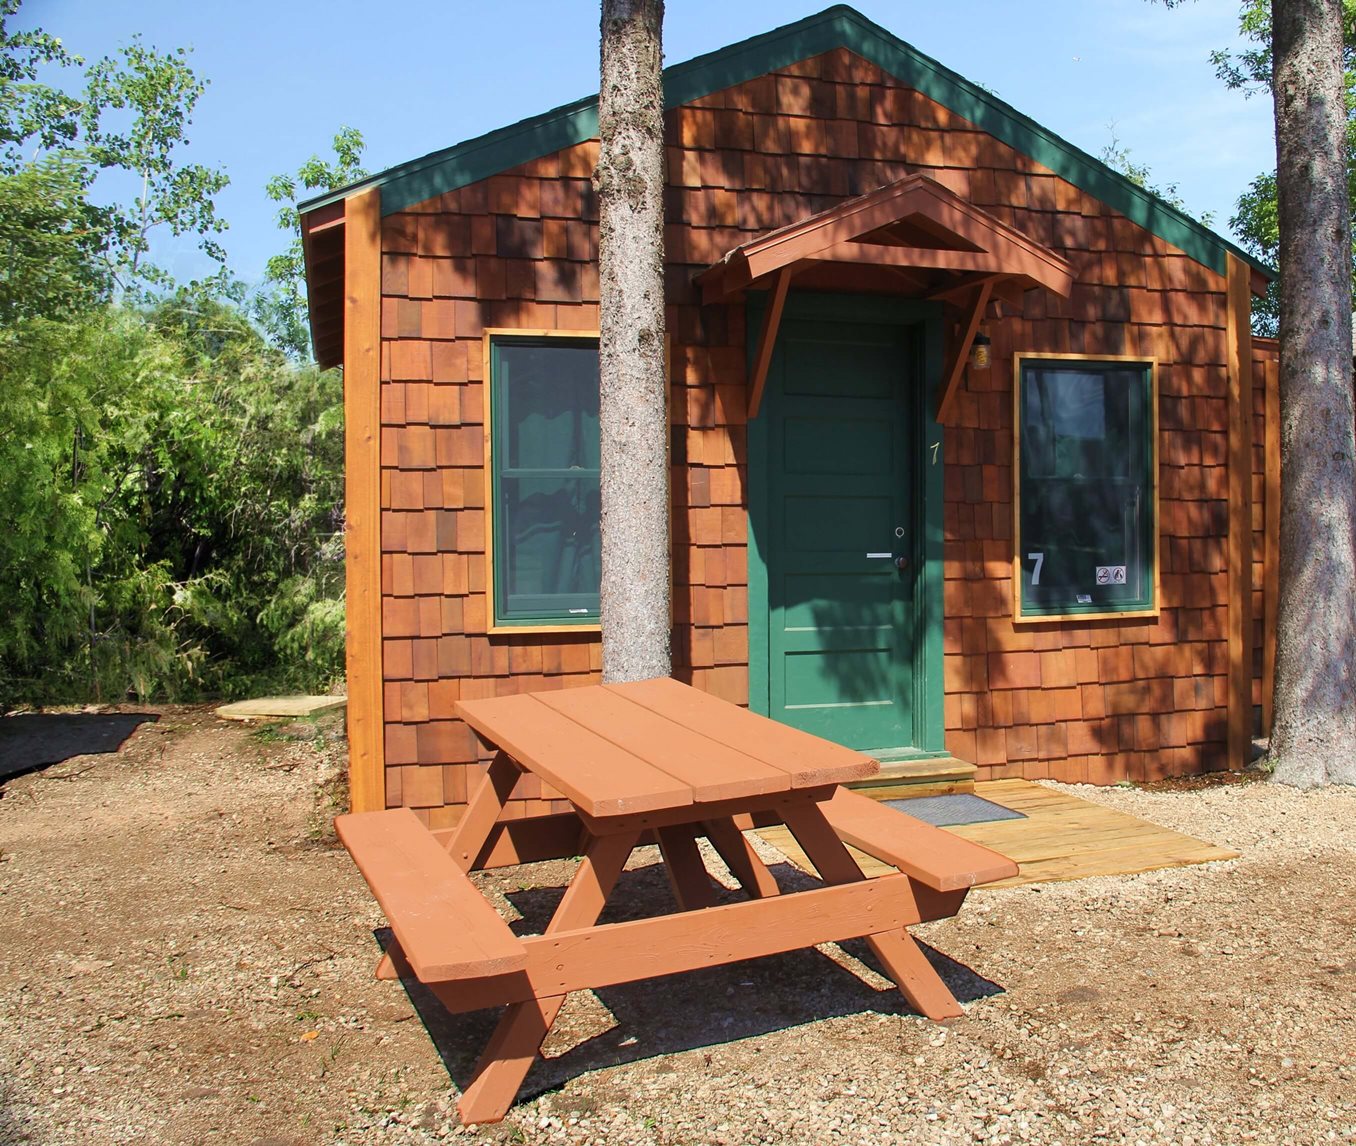 Exterior view of a six person cabin at Mackinac Lakefront Cabin Rentals in Mackinaw City, MI. © 2013 Frank Rogala.